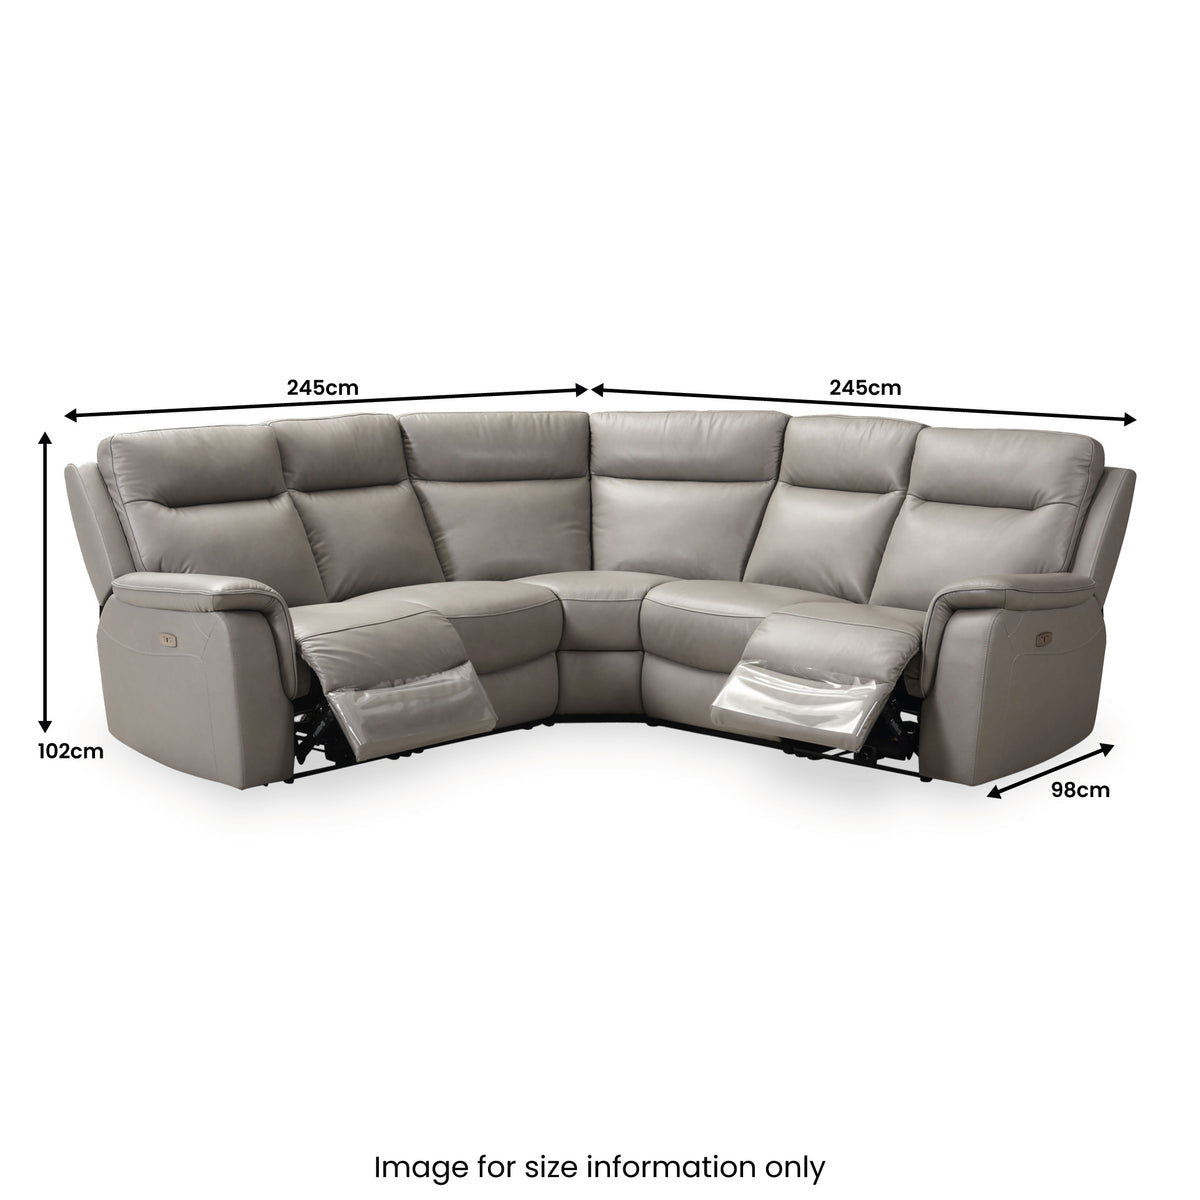 Walter Grey Leather Electric Reclining Large Corner Sofa dimensions